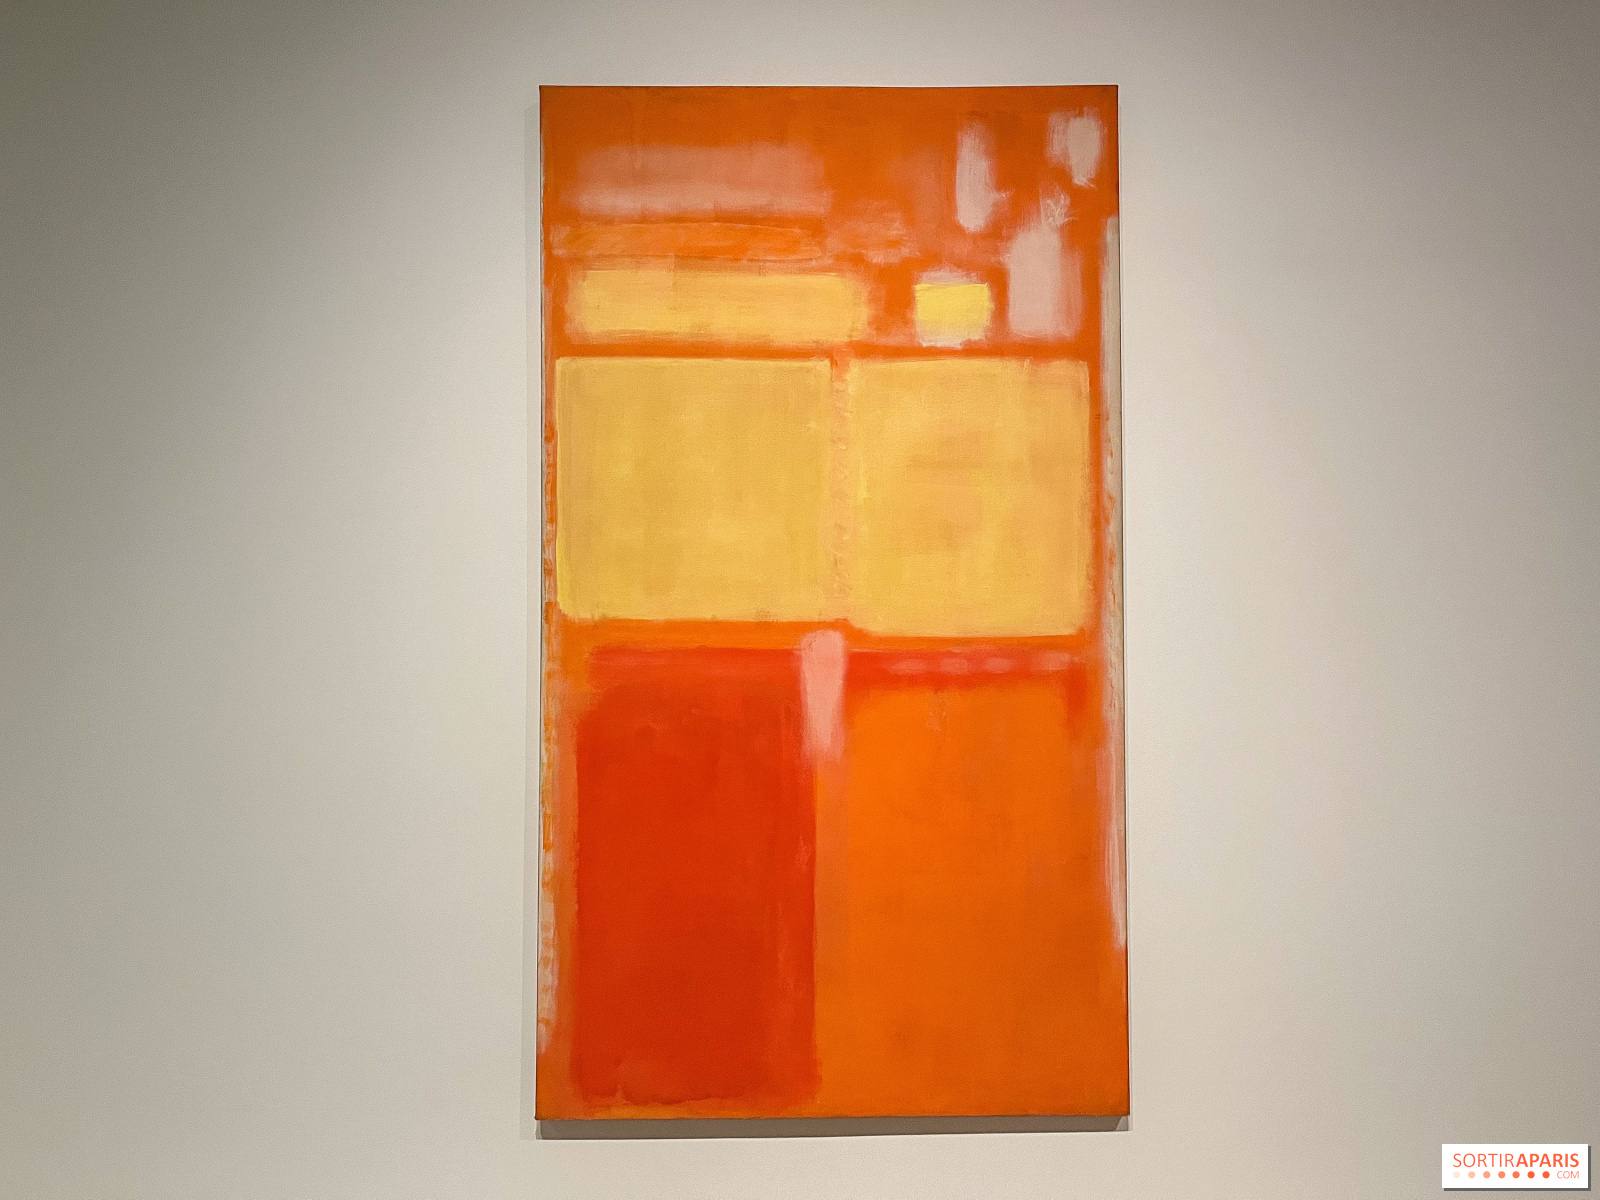 Rothko redefined: Major new exhibition of abstract artist opens in Paris to  rave reviews